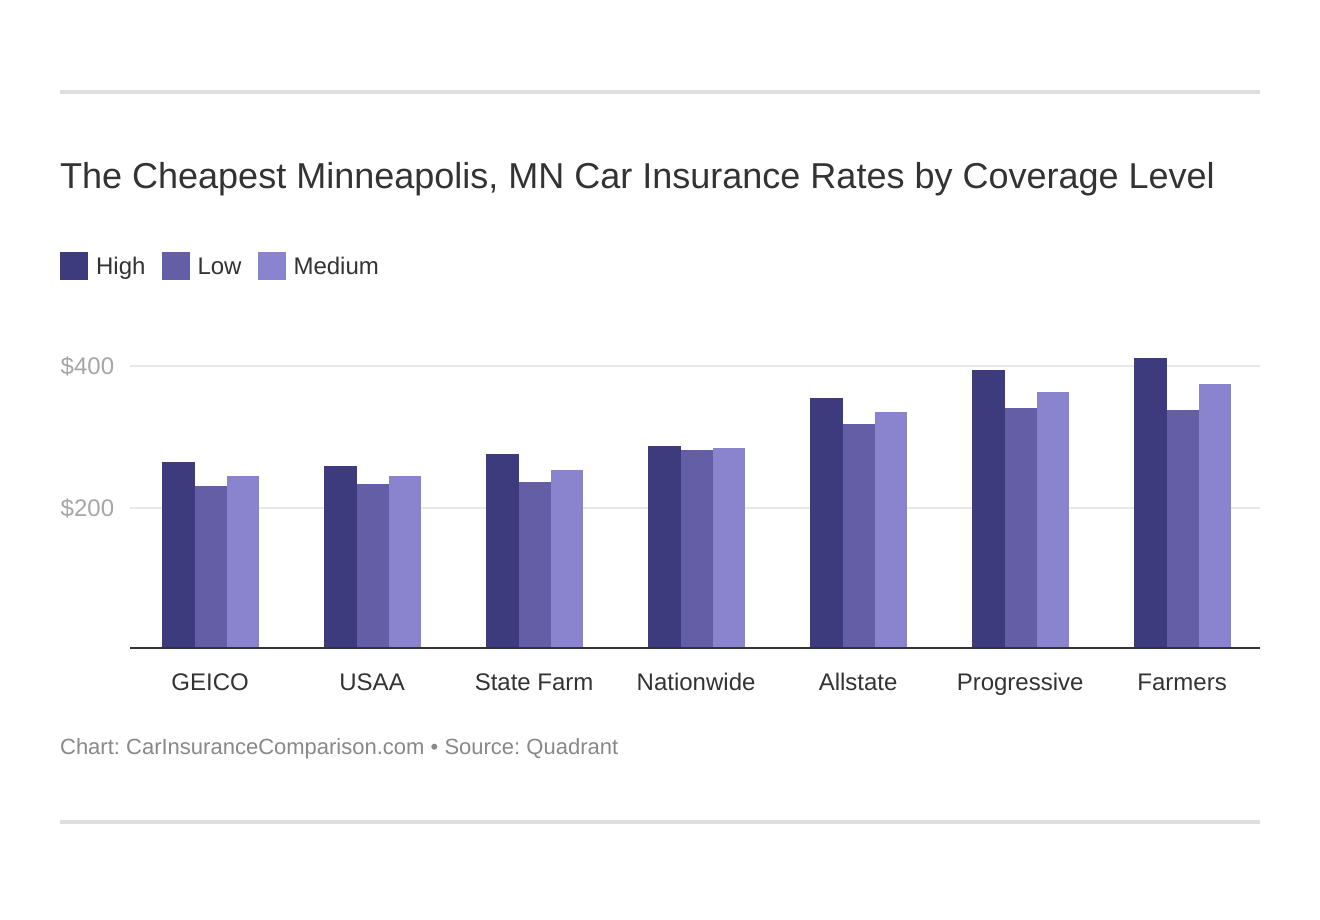 The Cheapest Minneapolis, MN Car Insurance Rates by Coverage Level